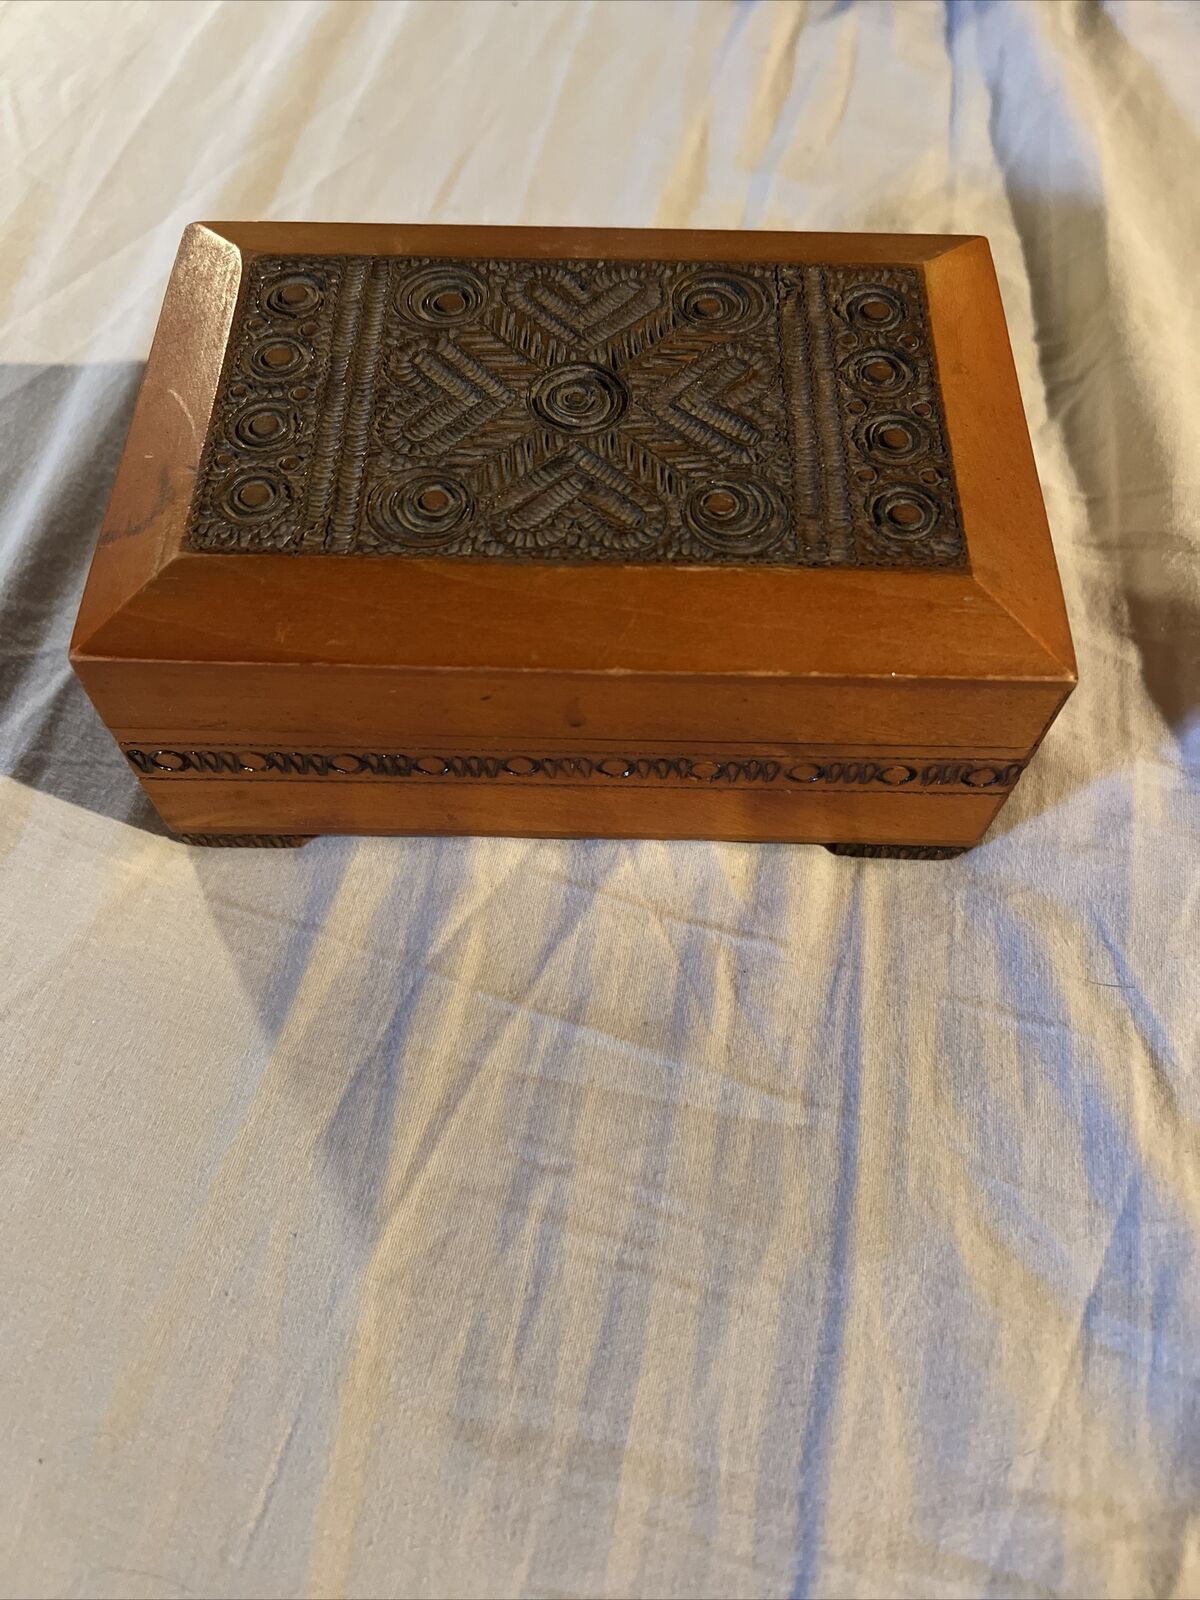 VINTAGE HAND CARVED WOODEN BOX  MADE IN POLAND TOP HAS HEARTS  . TRINKET JEWERLY